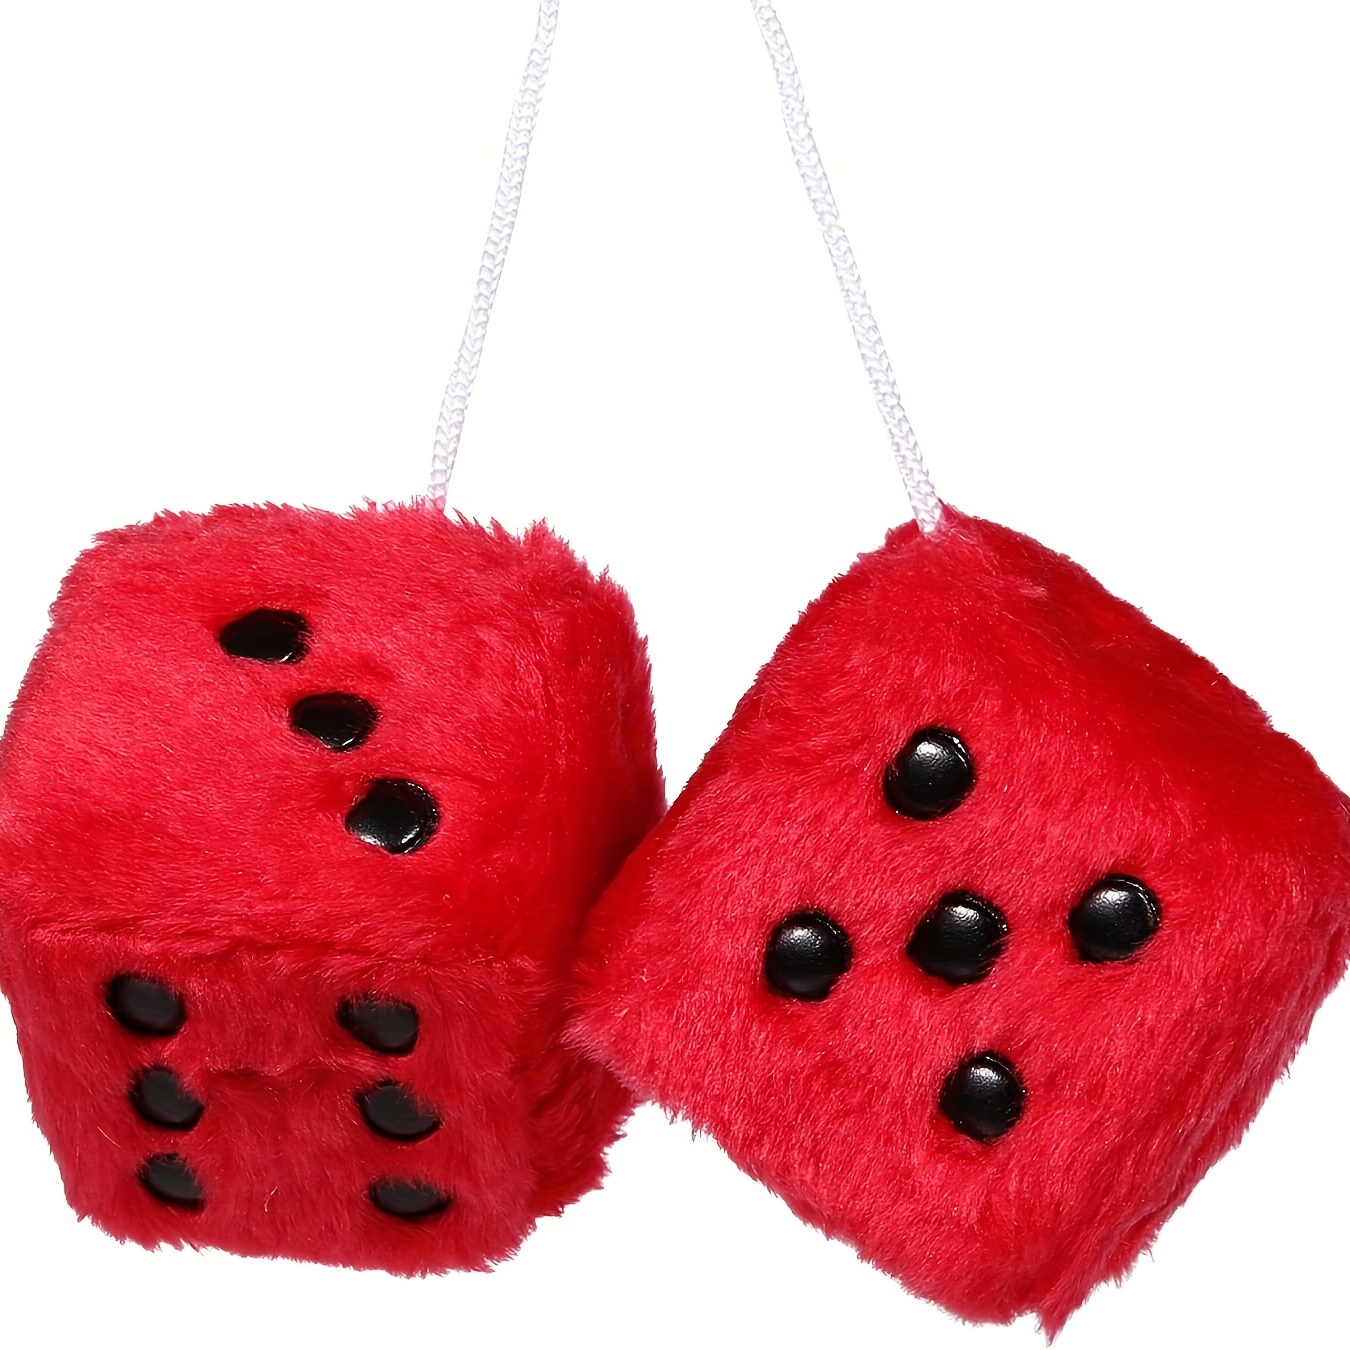 Huoge Car Dice for Mirror Plush Dice with Heart-Shaped Dots for